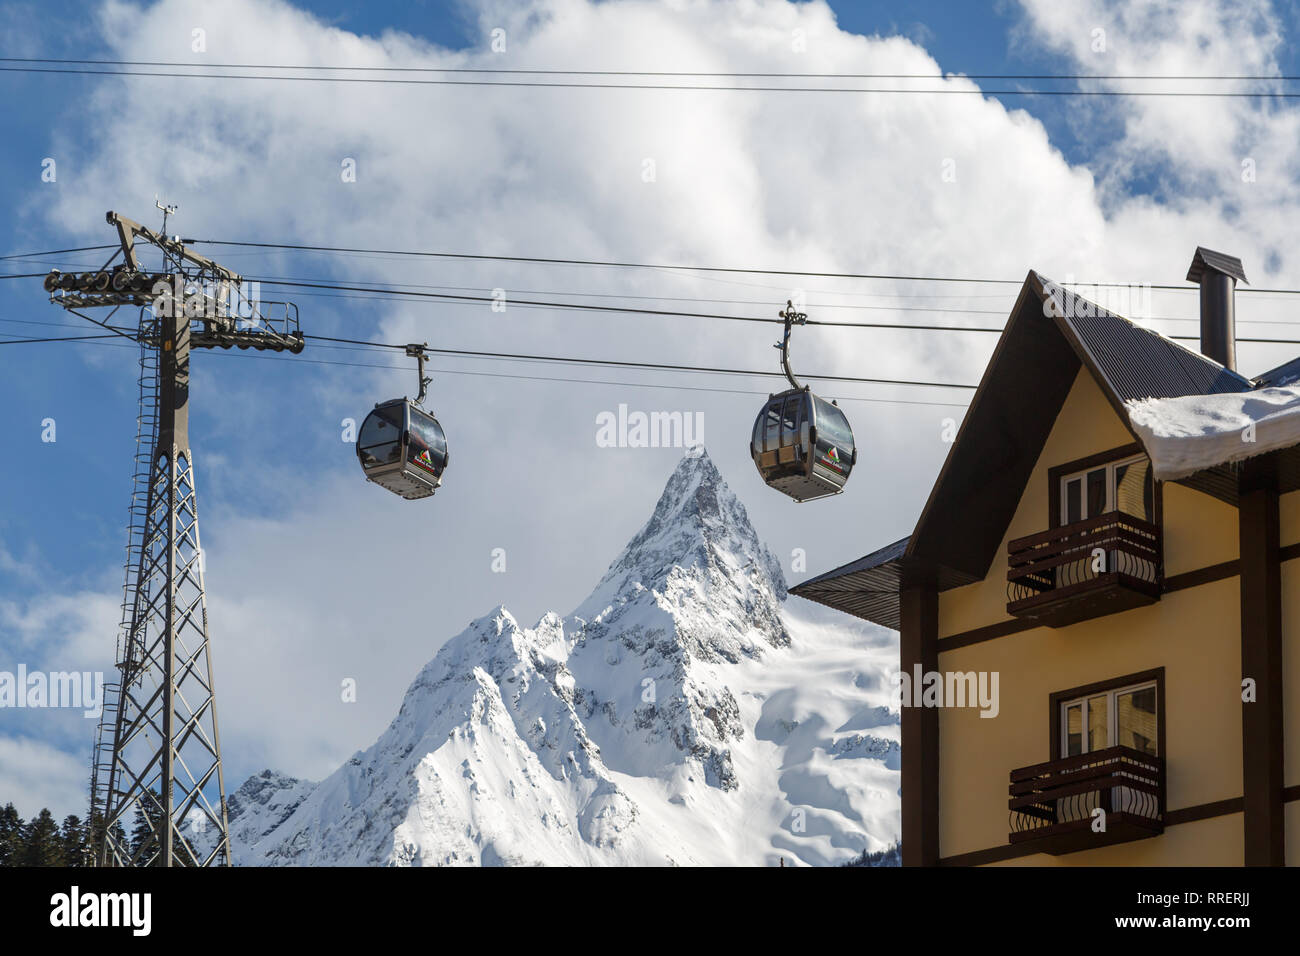 DOMBAY, RUSSIA, FEBRUARY 28, 2018: Cabins of the ski lift against the high snow-capped Caucasus Mountains Stock Photo